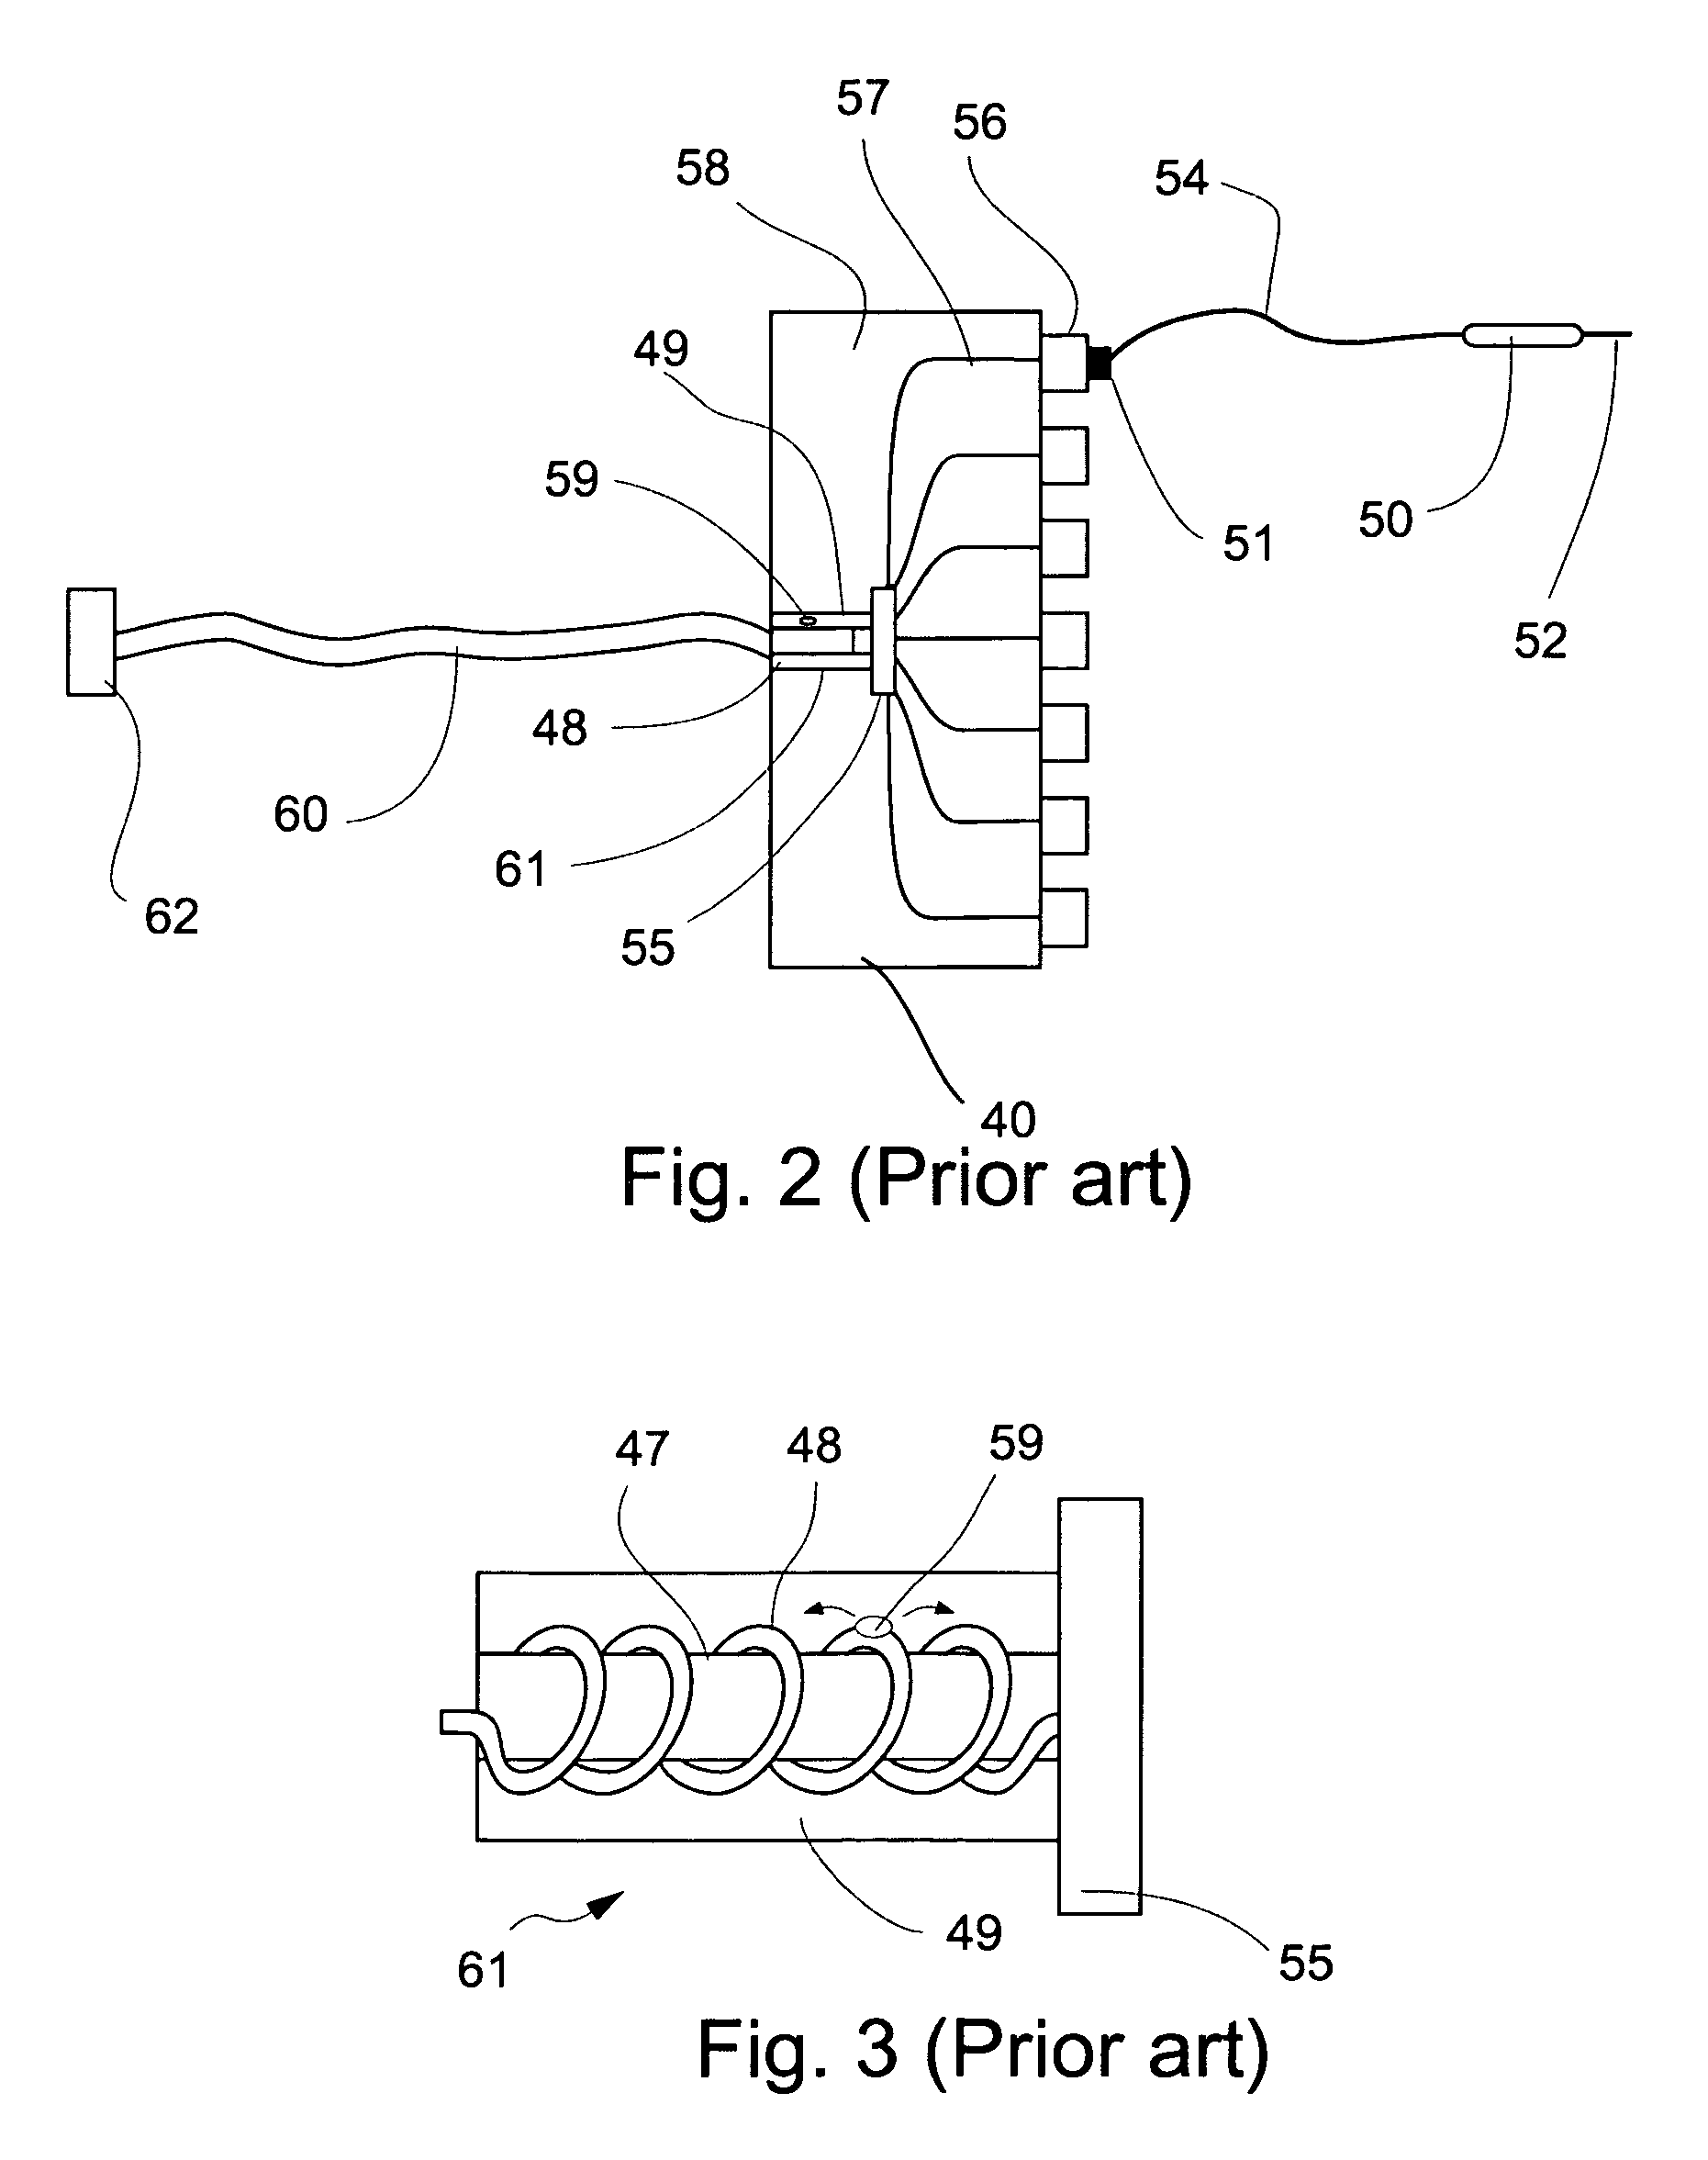 Apparatus and method for protecting tissues during cryoablation